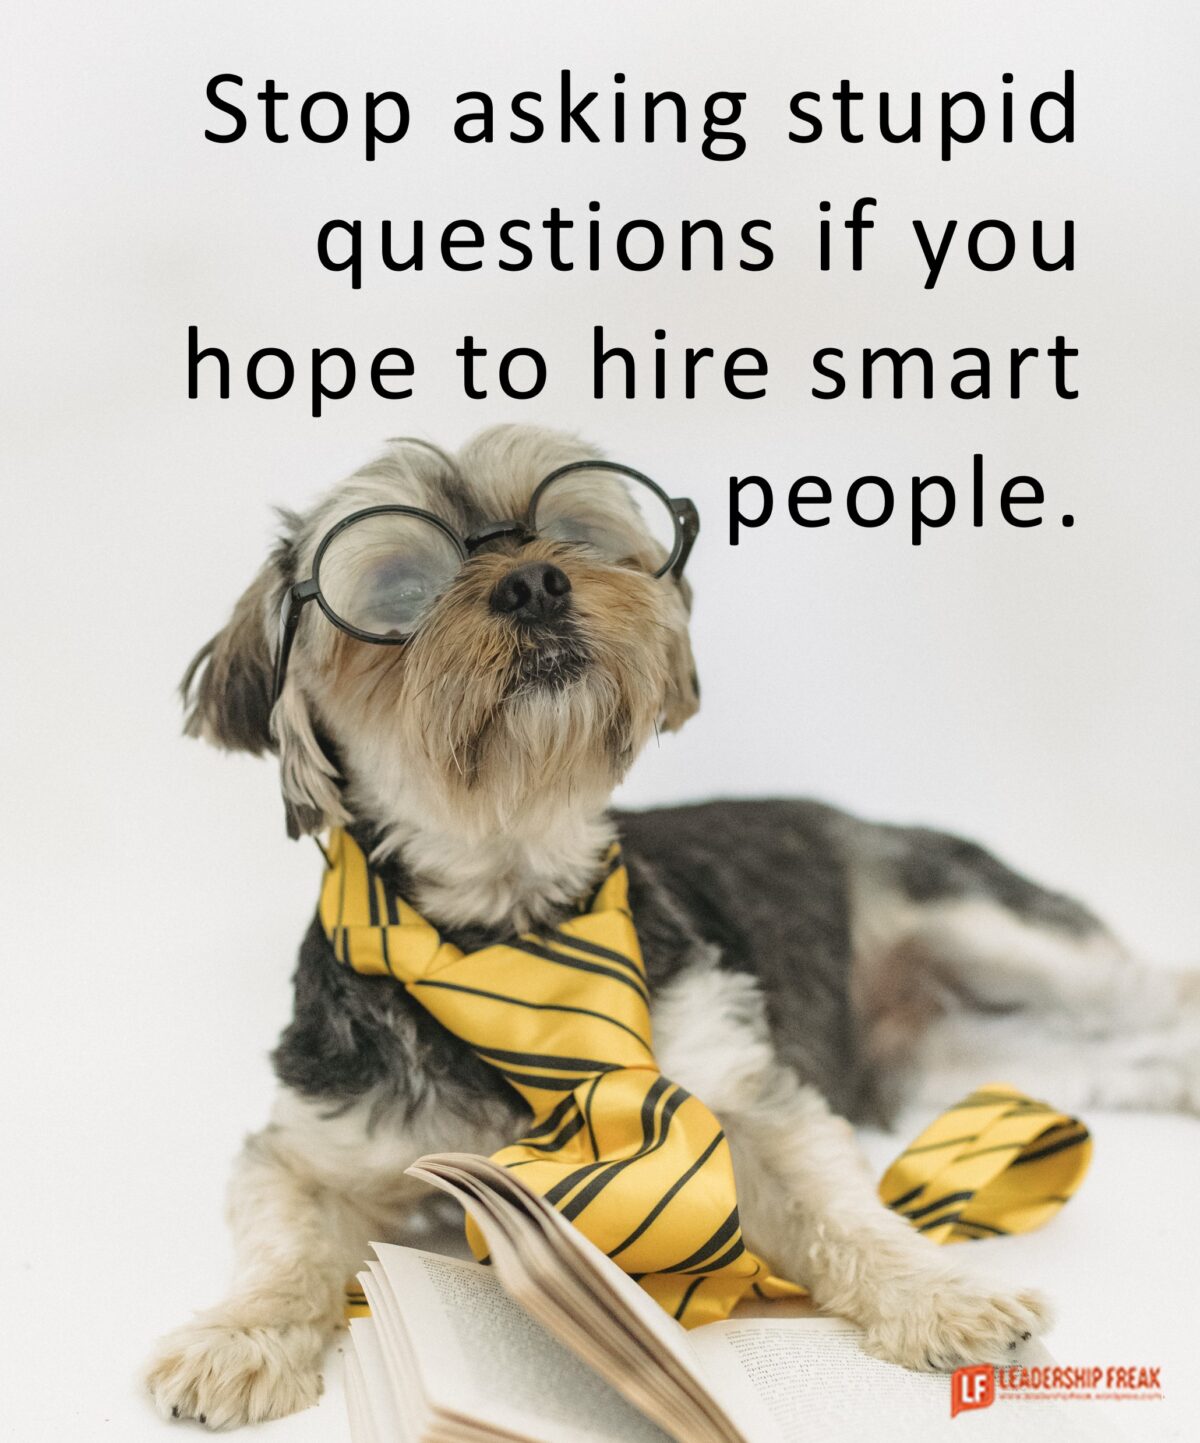 A New Approach to Hire the Smart People